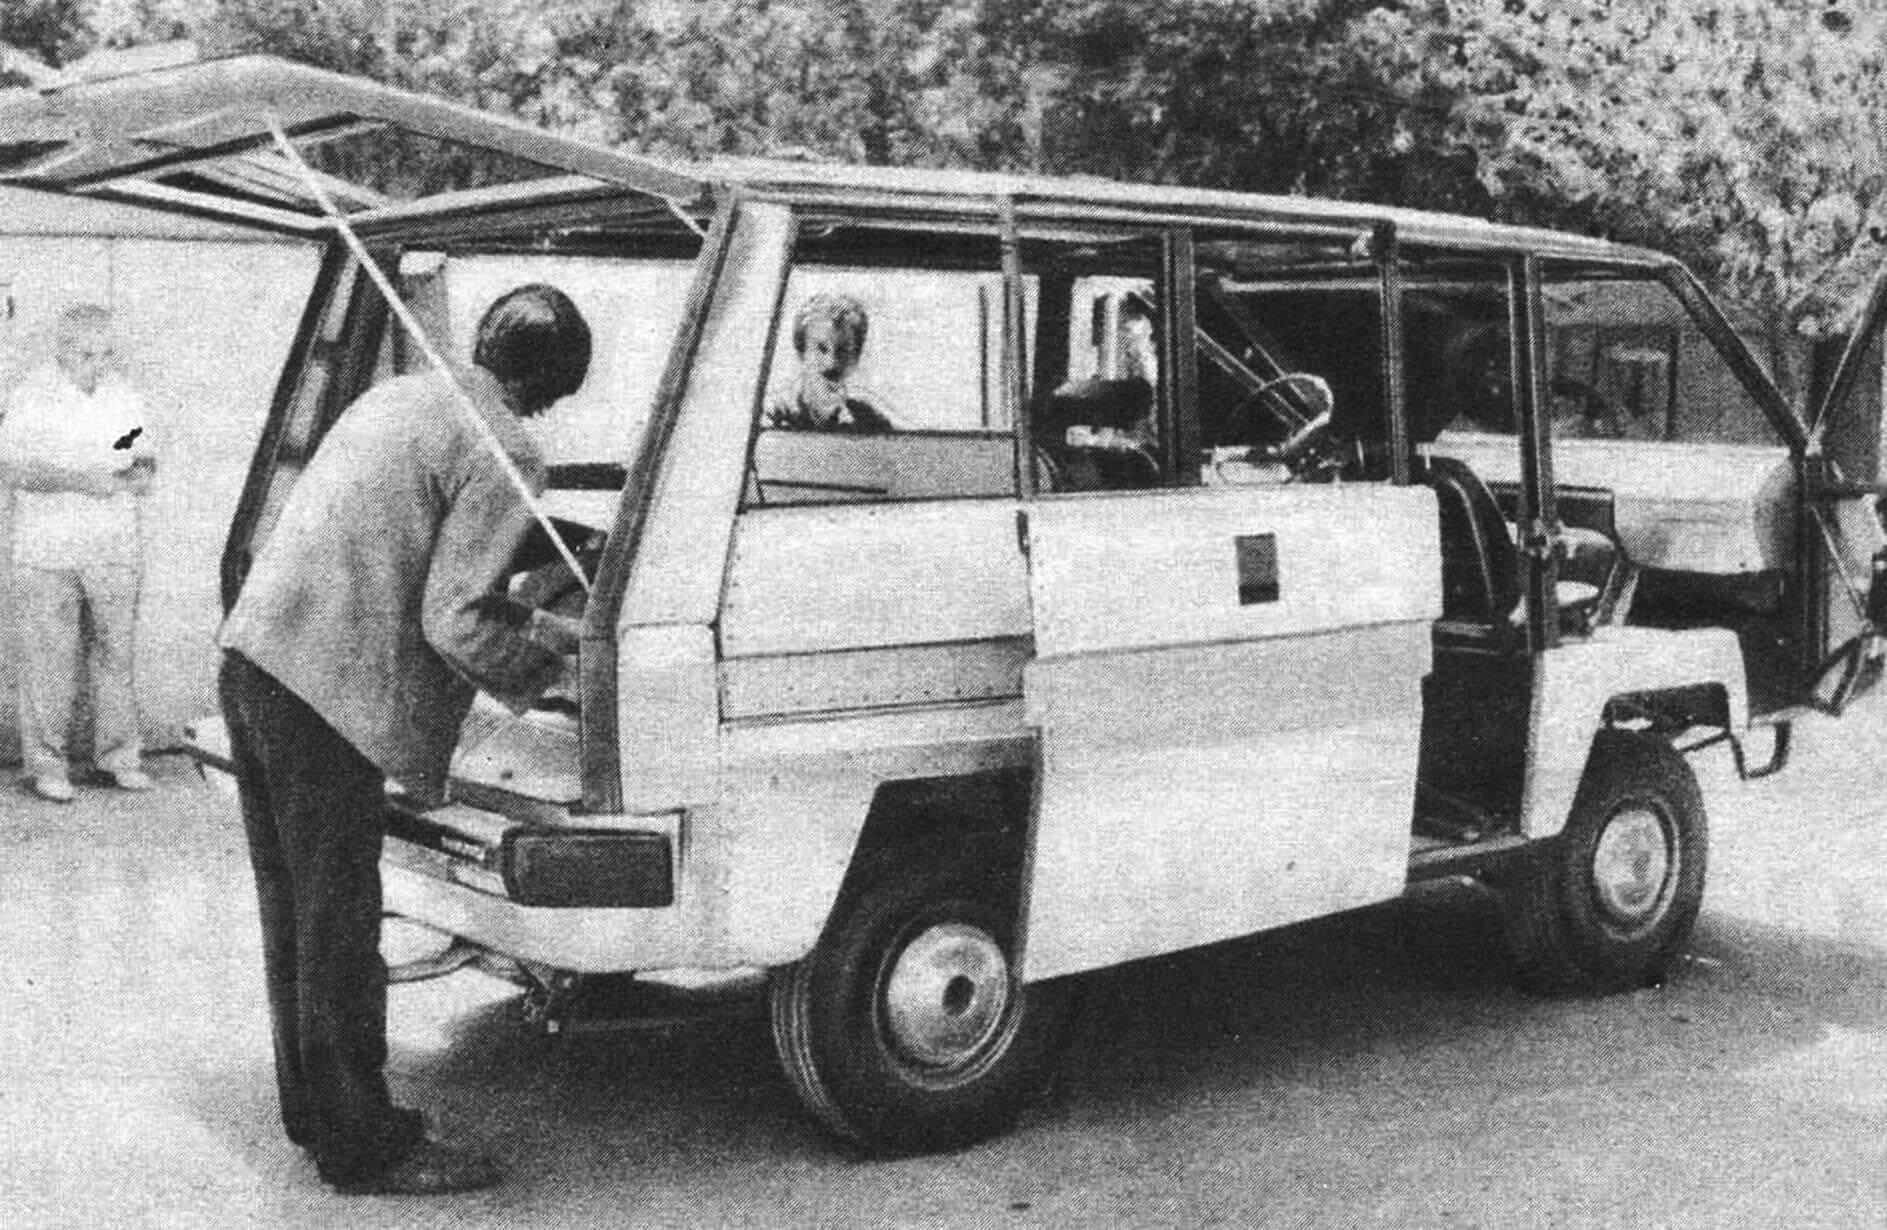 Car SABS-2 in the process of construction. Note how the side door opens.